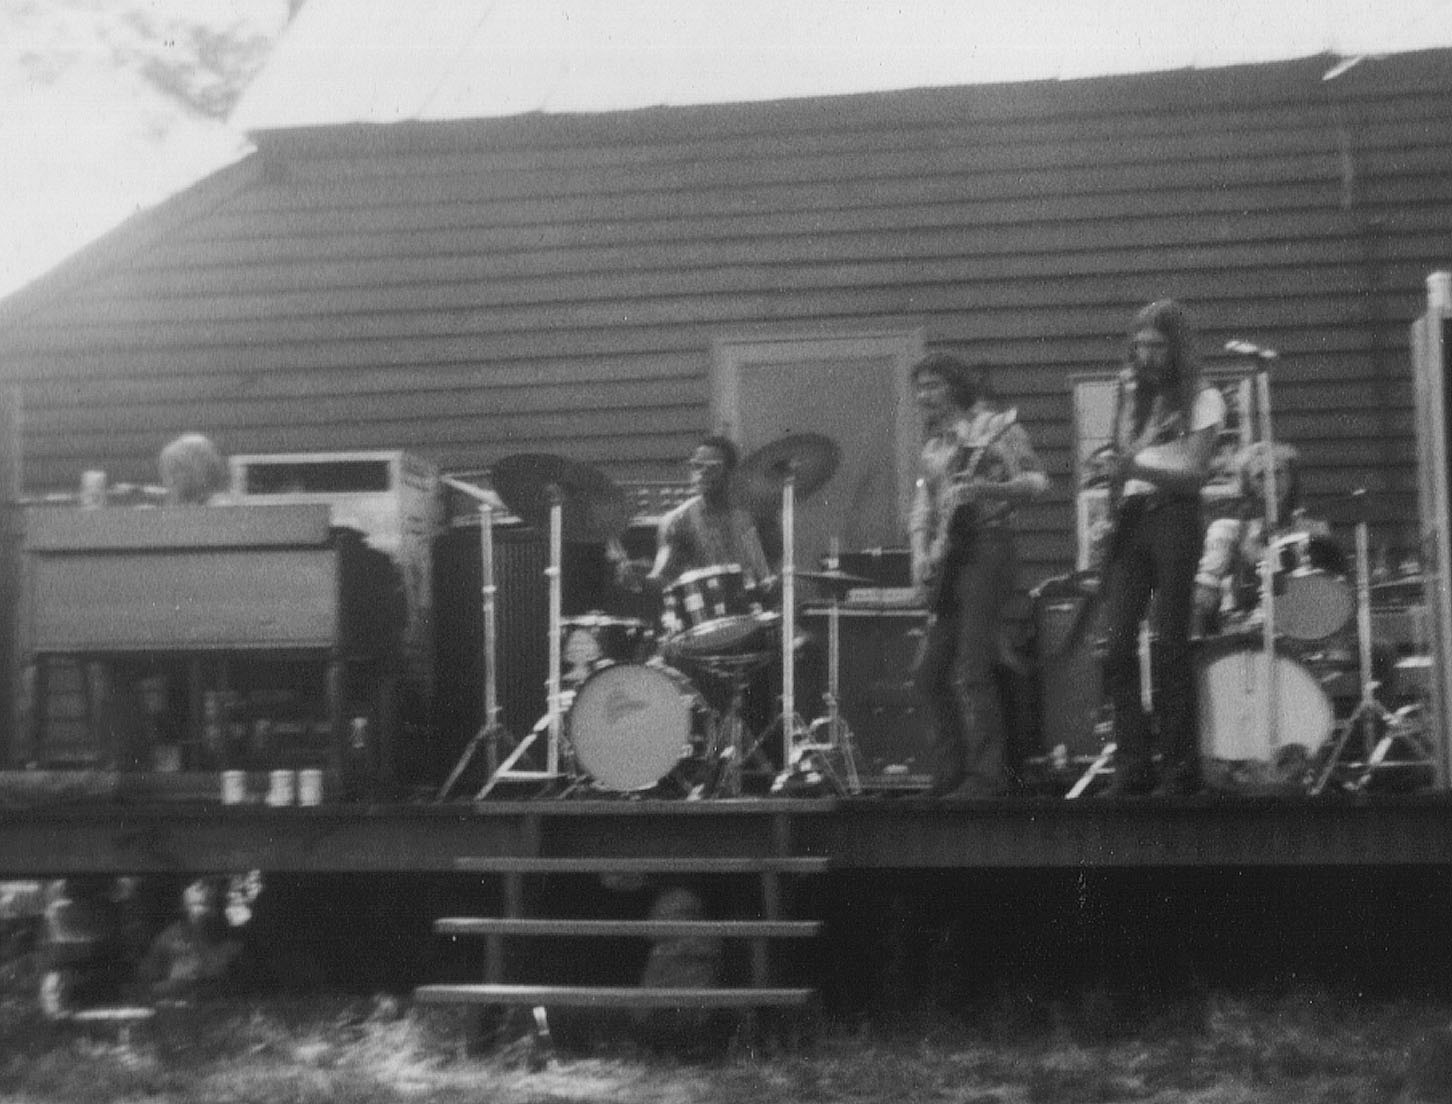 This is reportedly a picture of the first rehearsal of the band without Duane, taken on the farm in Juliette, GA sometime in November 1971. Photo credit goes to Elizabeth.